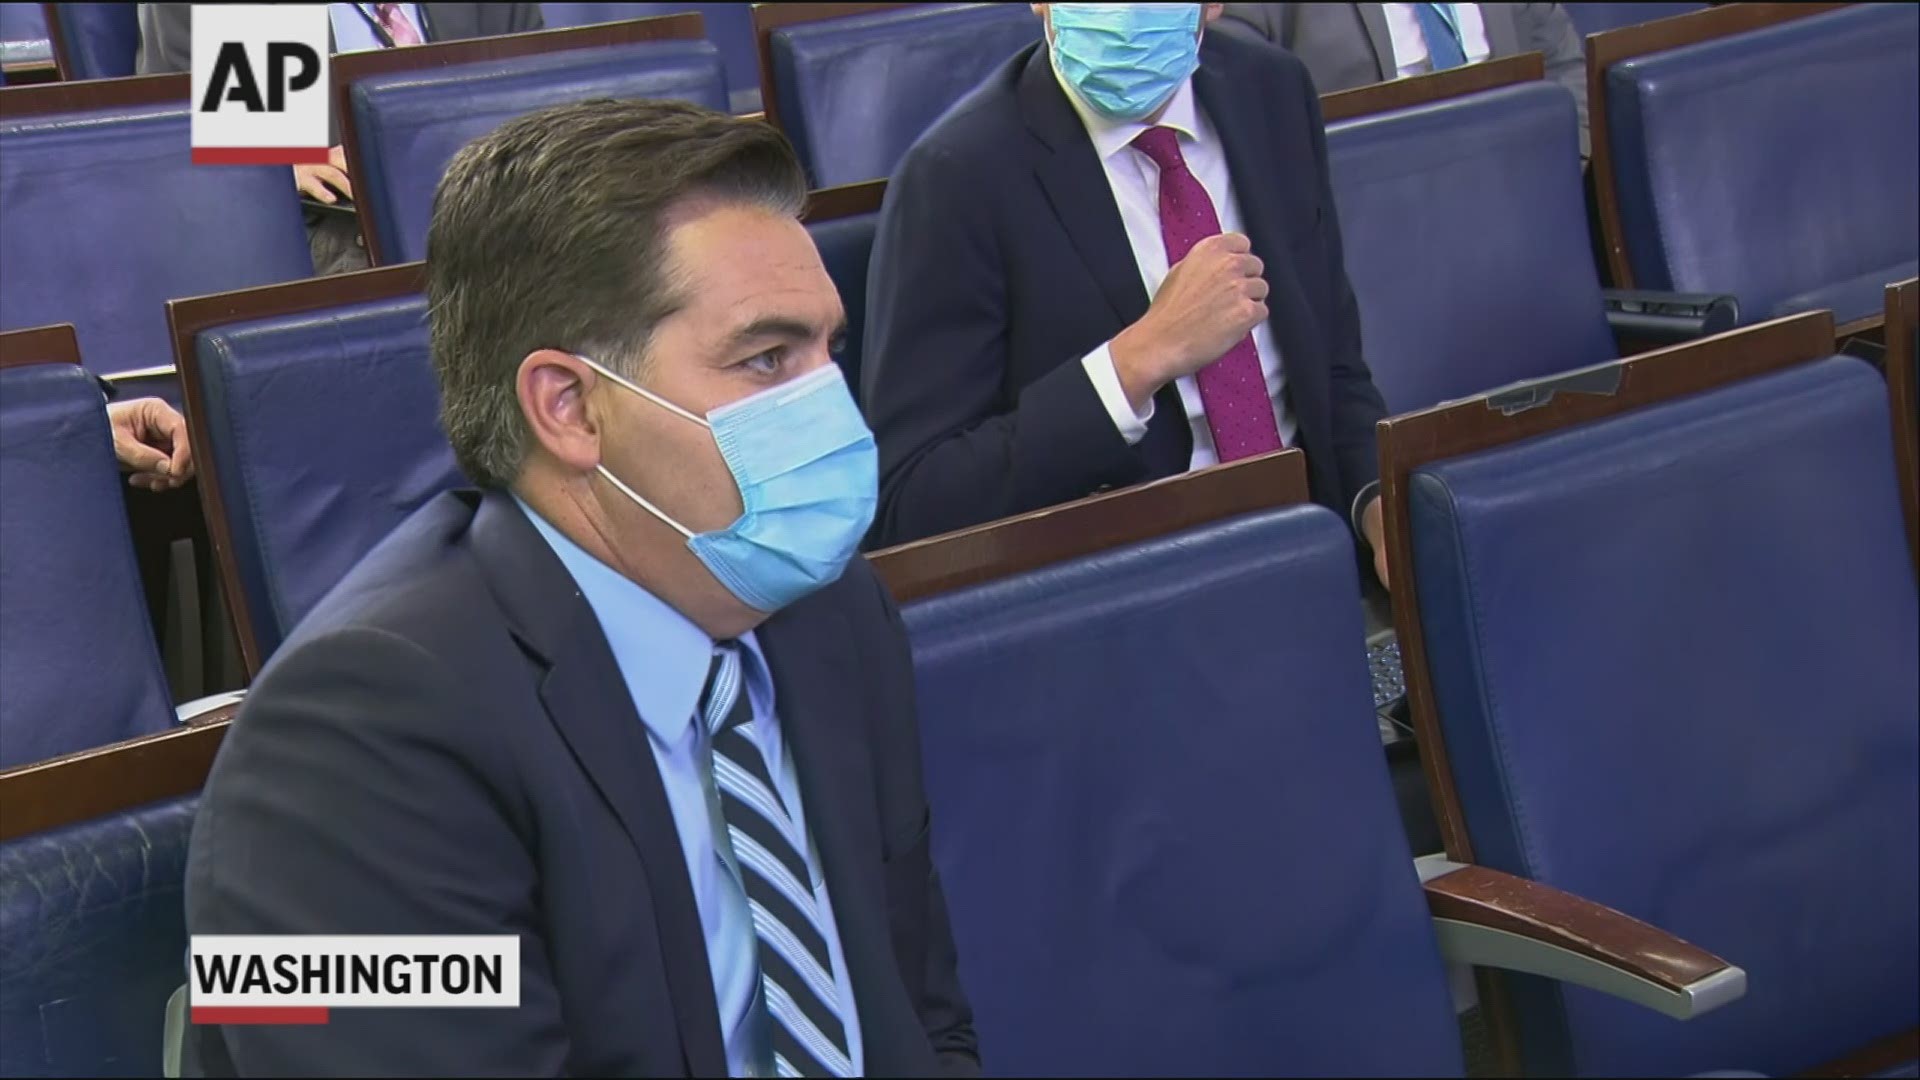 White House press secretary insists there is "no opposition research" being sent to reporters about the nation's top infectious disease specialist, Dr. Fauci